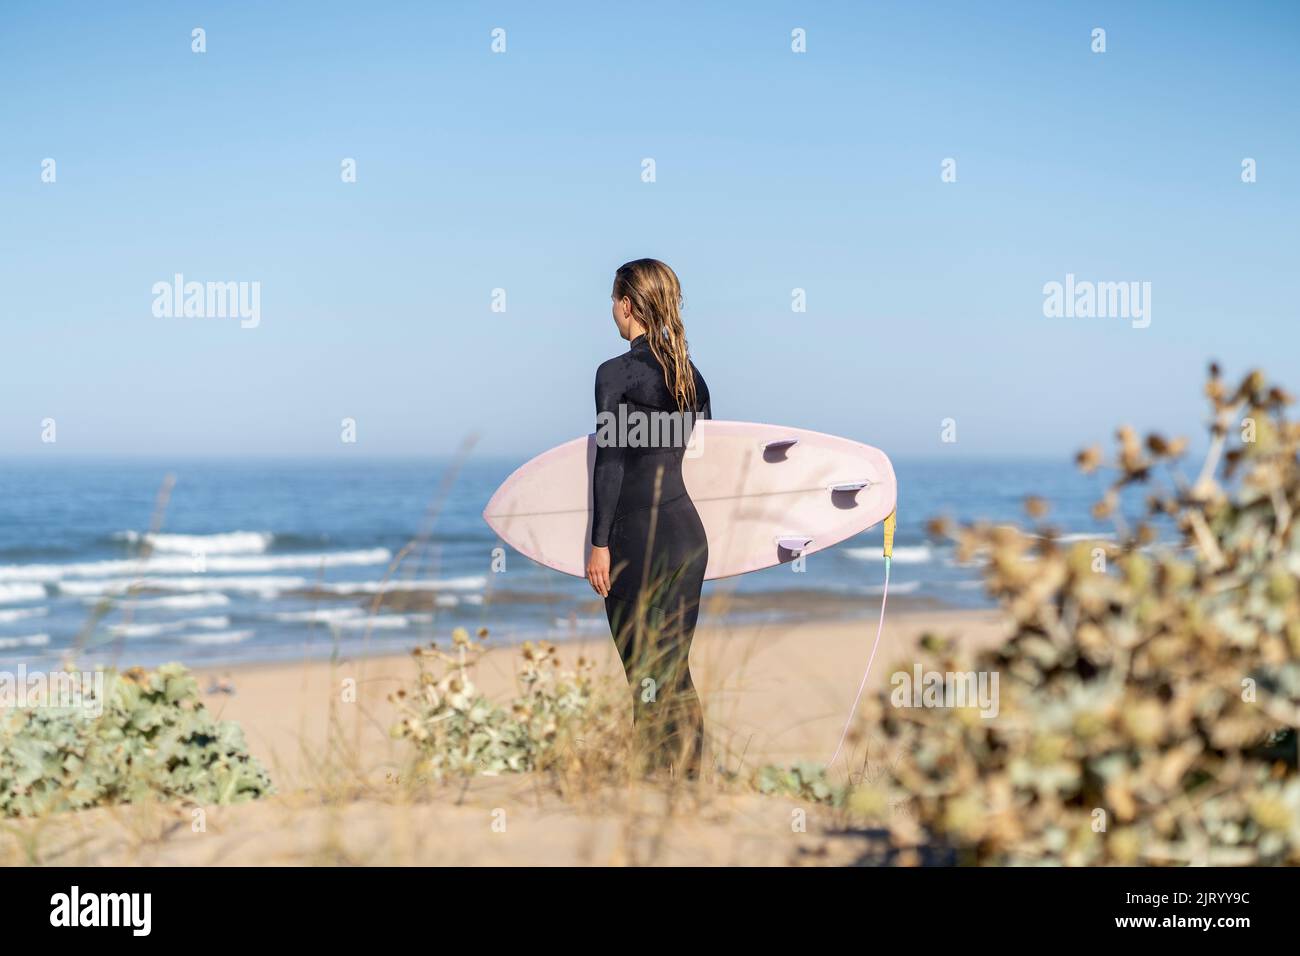 Surfer girl at the beach with her surfboard looking at the ocecan waves in the morning. Stock Photo